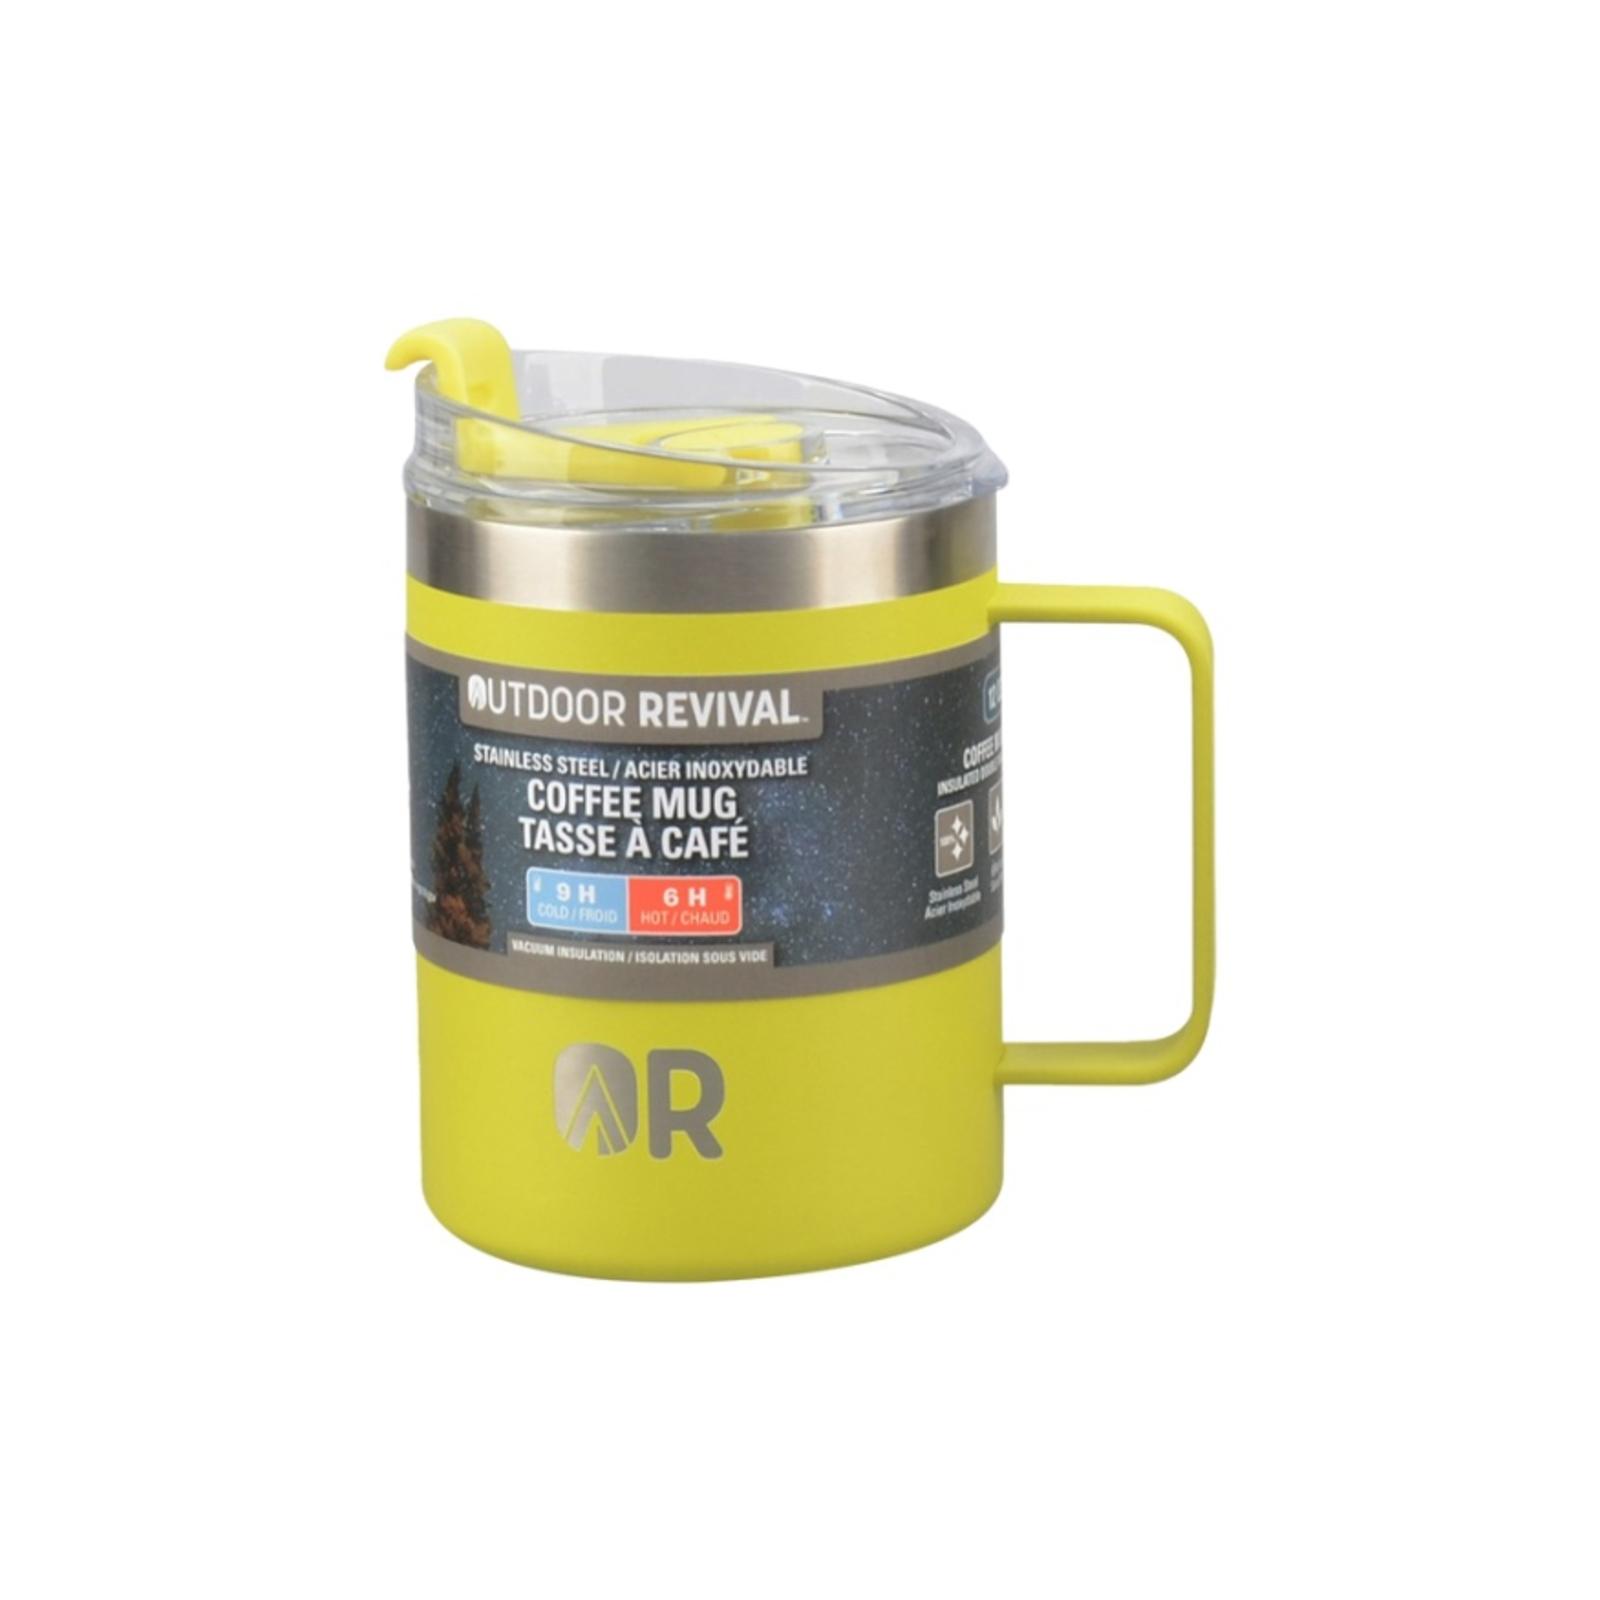 Outdoor Revival 12 OZ Coffee Mug in lime green